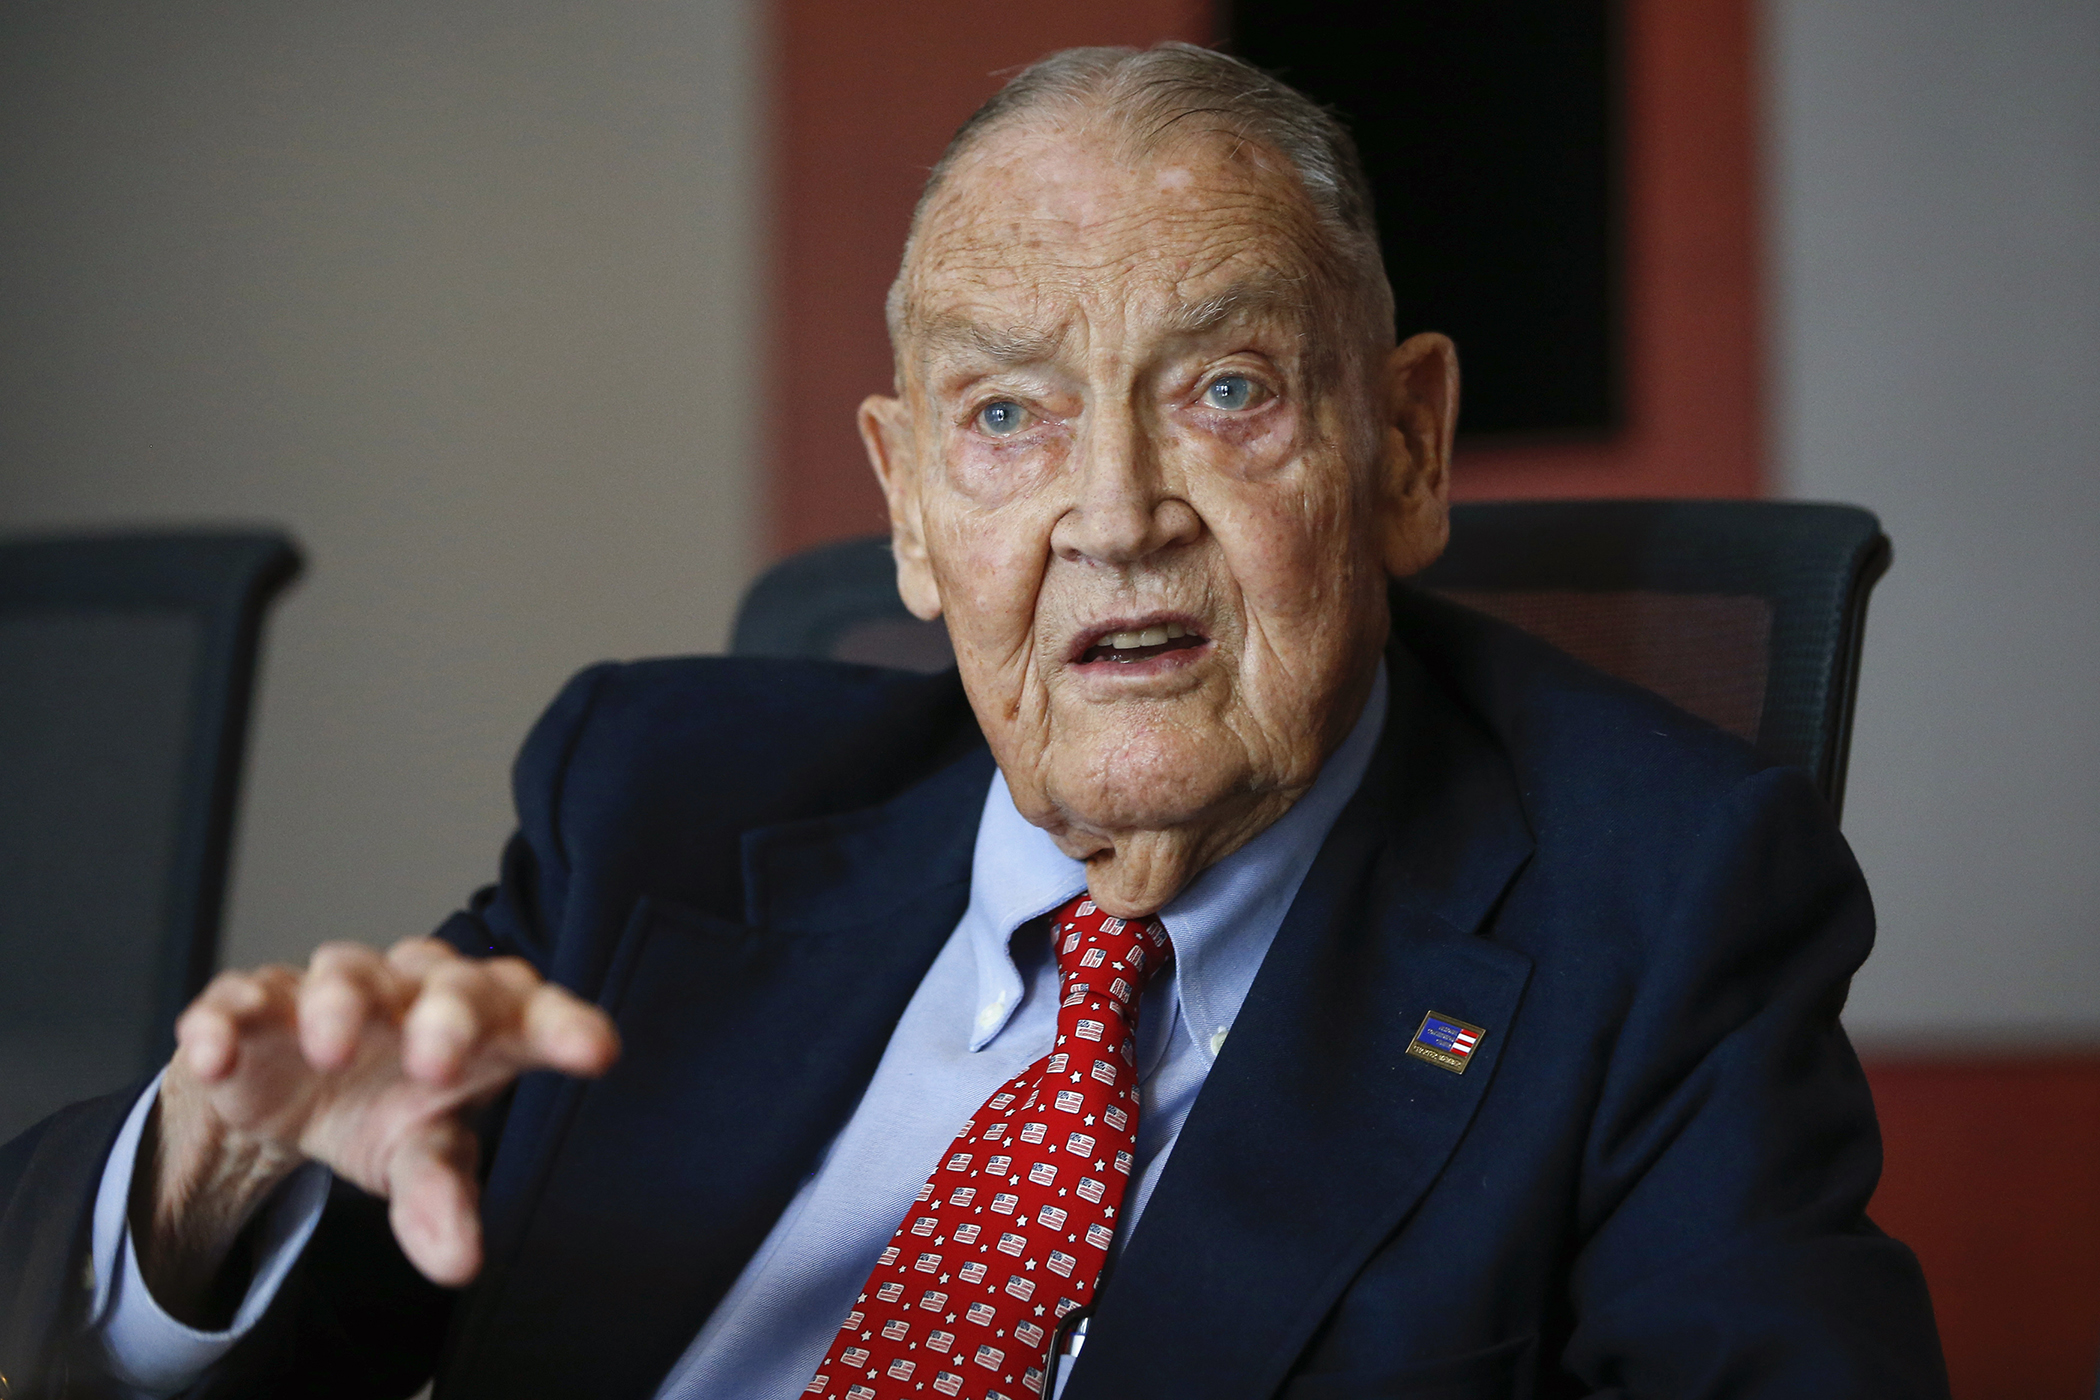 Jack Bogle Sounds Off: 10 Provocative New Pronouncements from the Legendary Founder of Vanguard